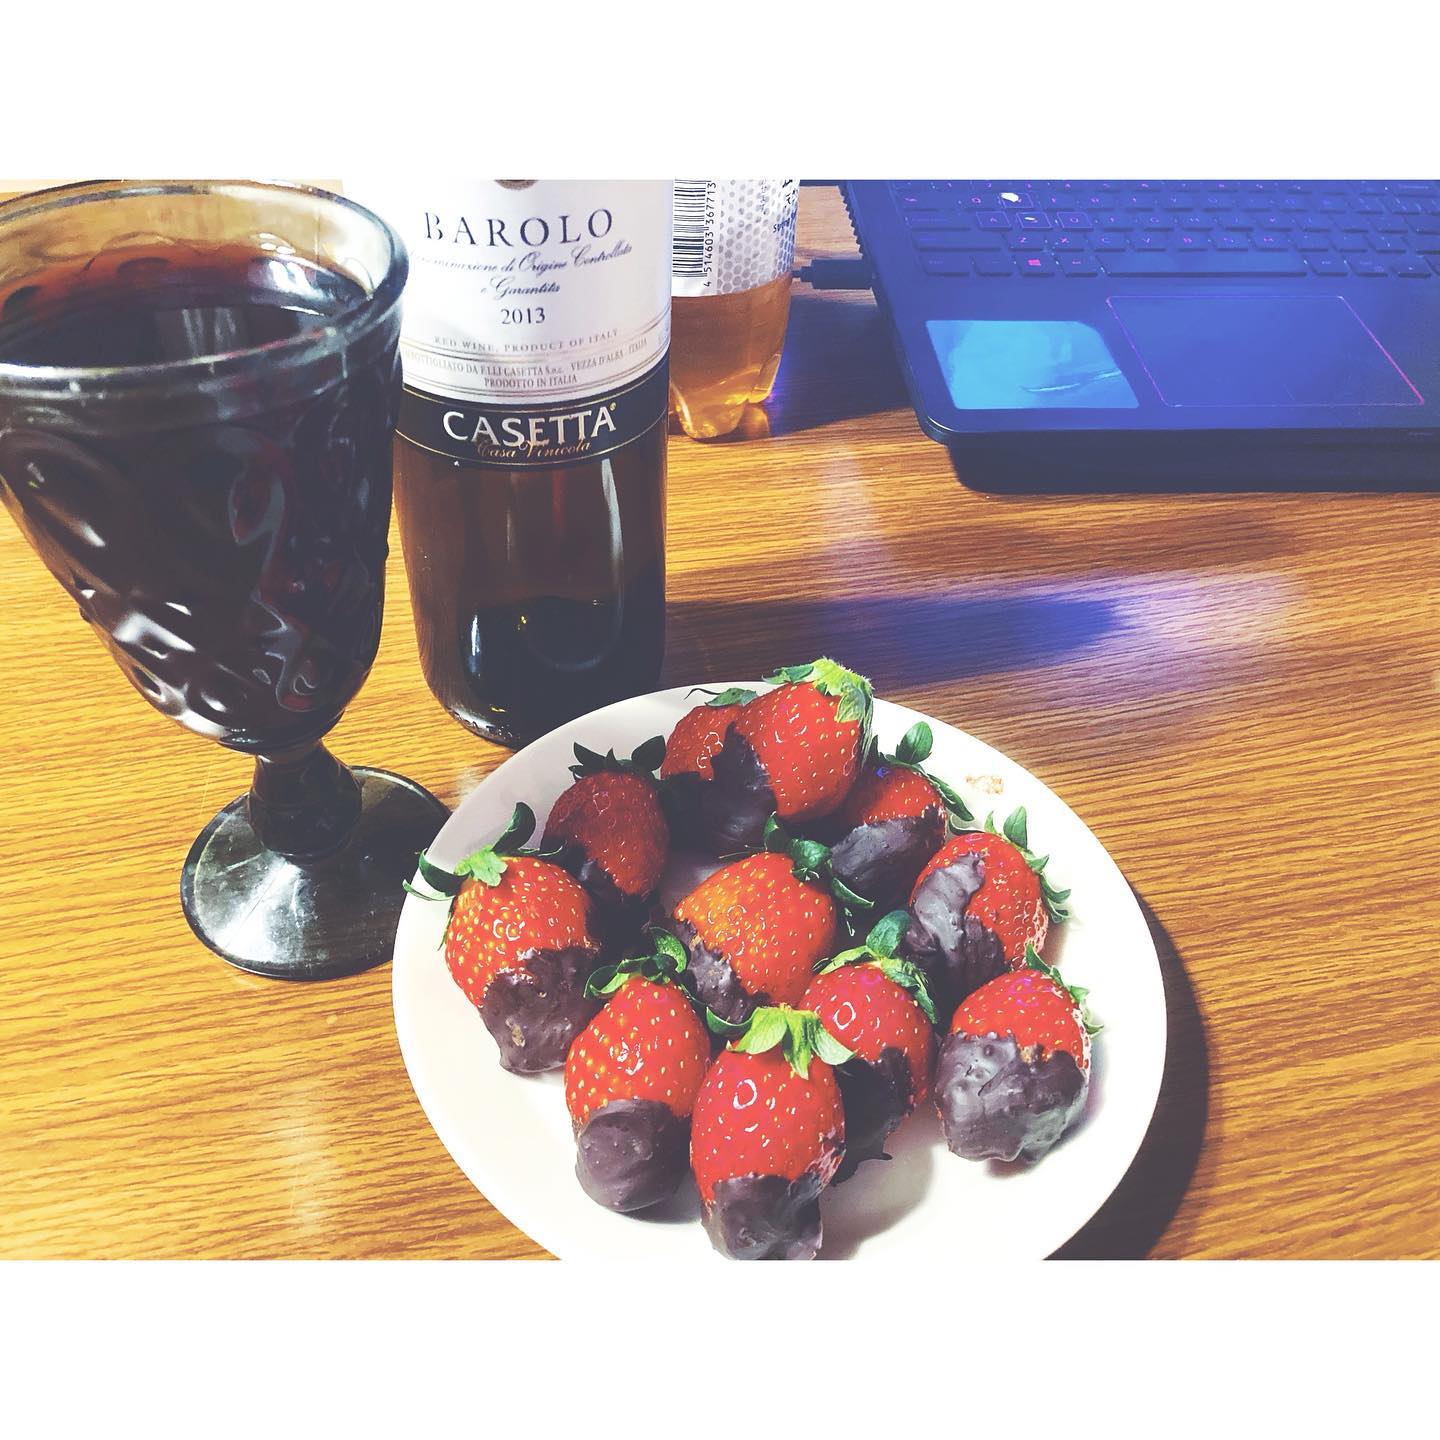 Double tap if you 💓 Chocolate Covered Strawberries🍓
With #barolo 🍷 

＊
More recipes on my blog🙇🏻‍♀️
Blogでレシピ書いてます、プロフィールから🙇🏻‍♀️
@akoscookbook
＊

#レシピ #ブログ初心者 #料理すきな人と繋がりたい #料理好きな人と繋がりたい #おうちごはん部 　#ごはん記録 #クッキングラマー#recipeoftheday #foodporn #foodblogger #foodstagram #photooftheday #instalike #yummyyummy #eatright #cookingathome #instafood #japanesefood #yummy #dinner #homemadecooking  #いちごスイーツ #chocolatecoveredstrawberries #barolo #wineweekend #chocolatestrawberries